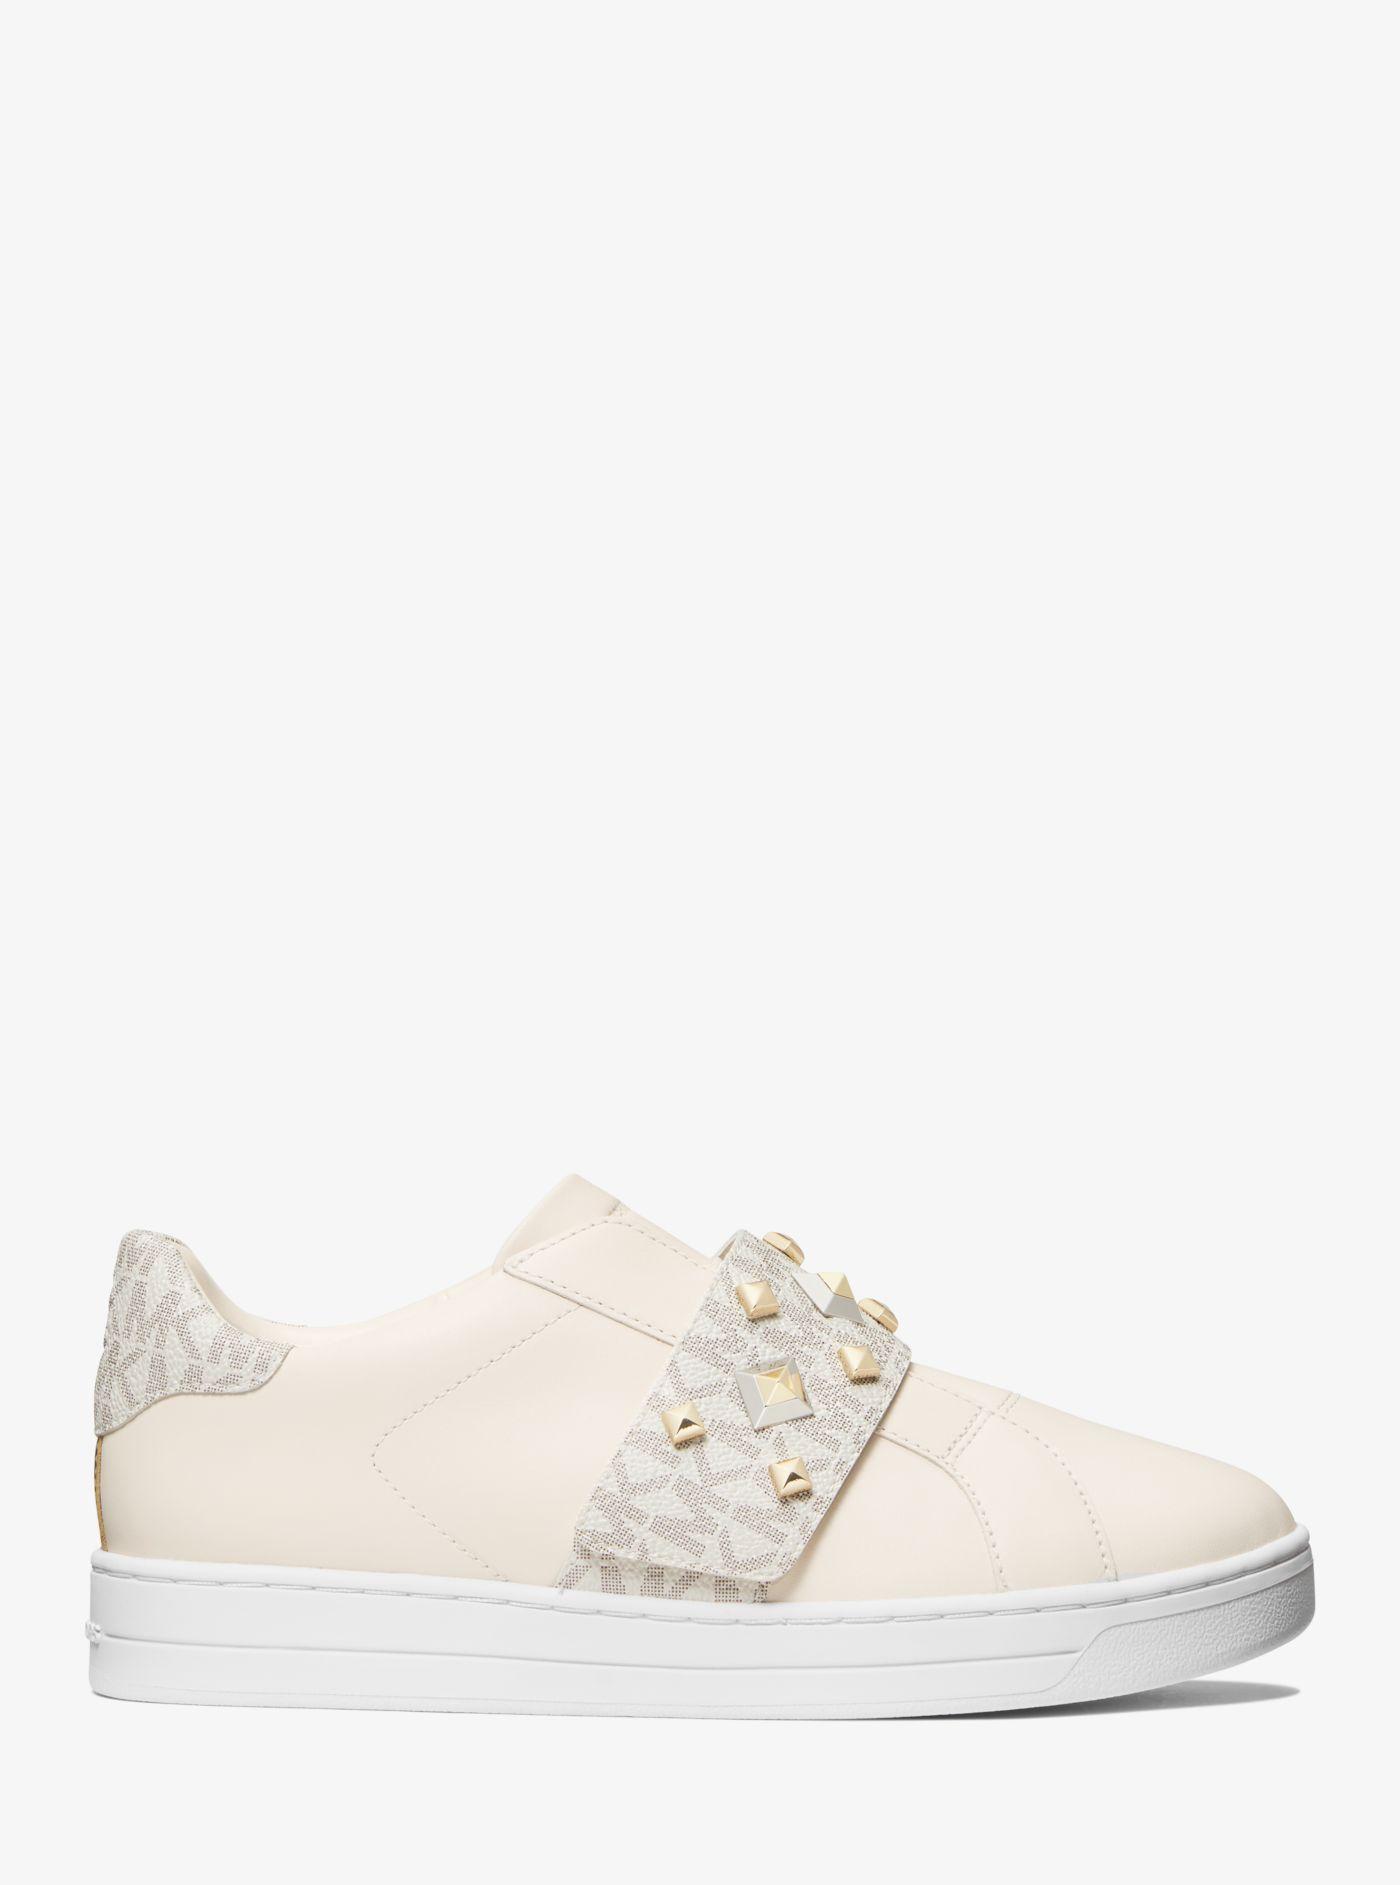 Michael Kors Kenna Leather And Studded Logo Sneaker | Lyst